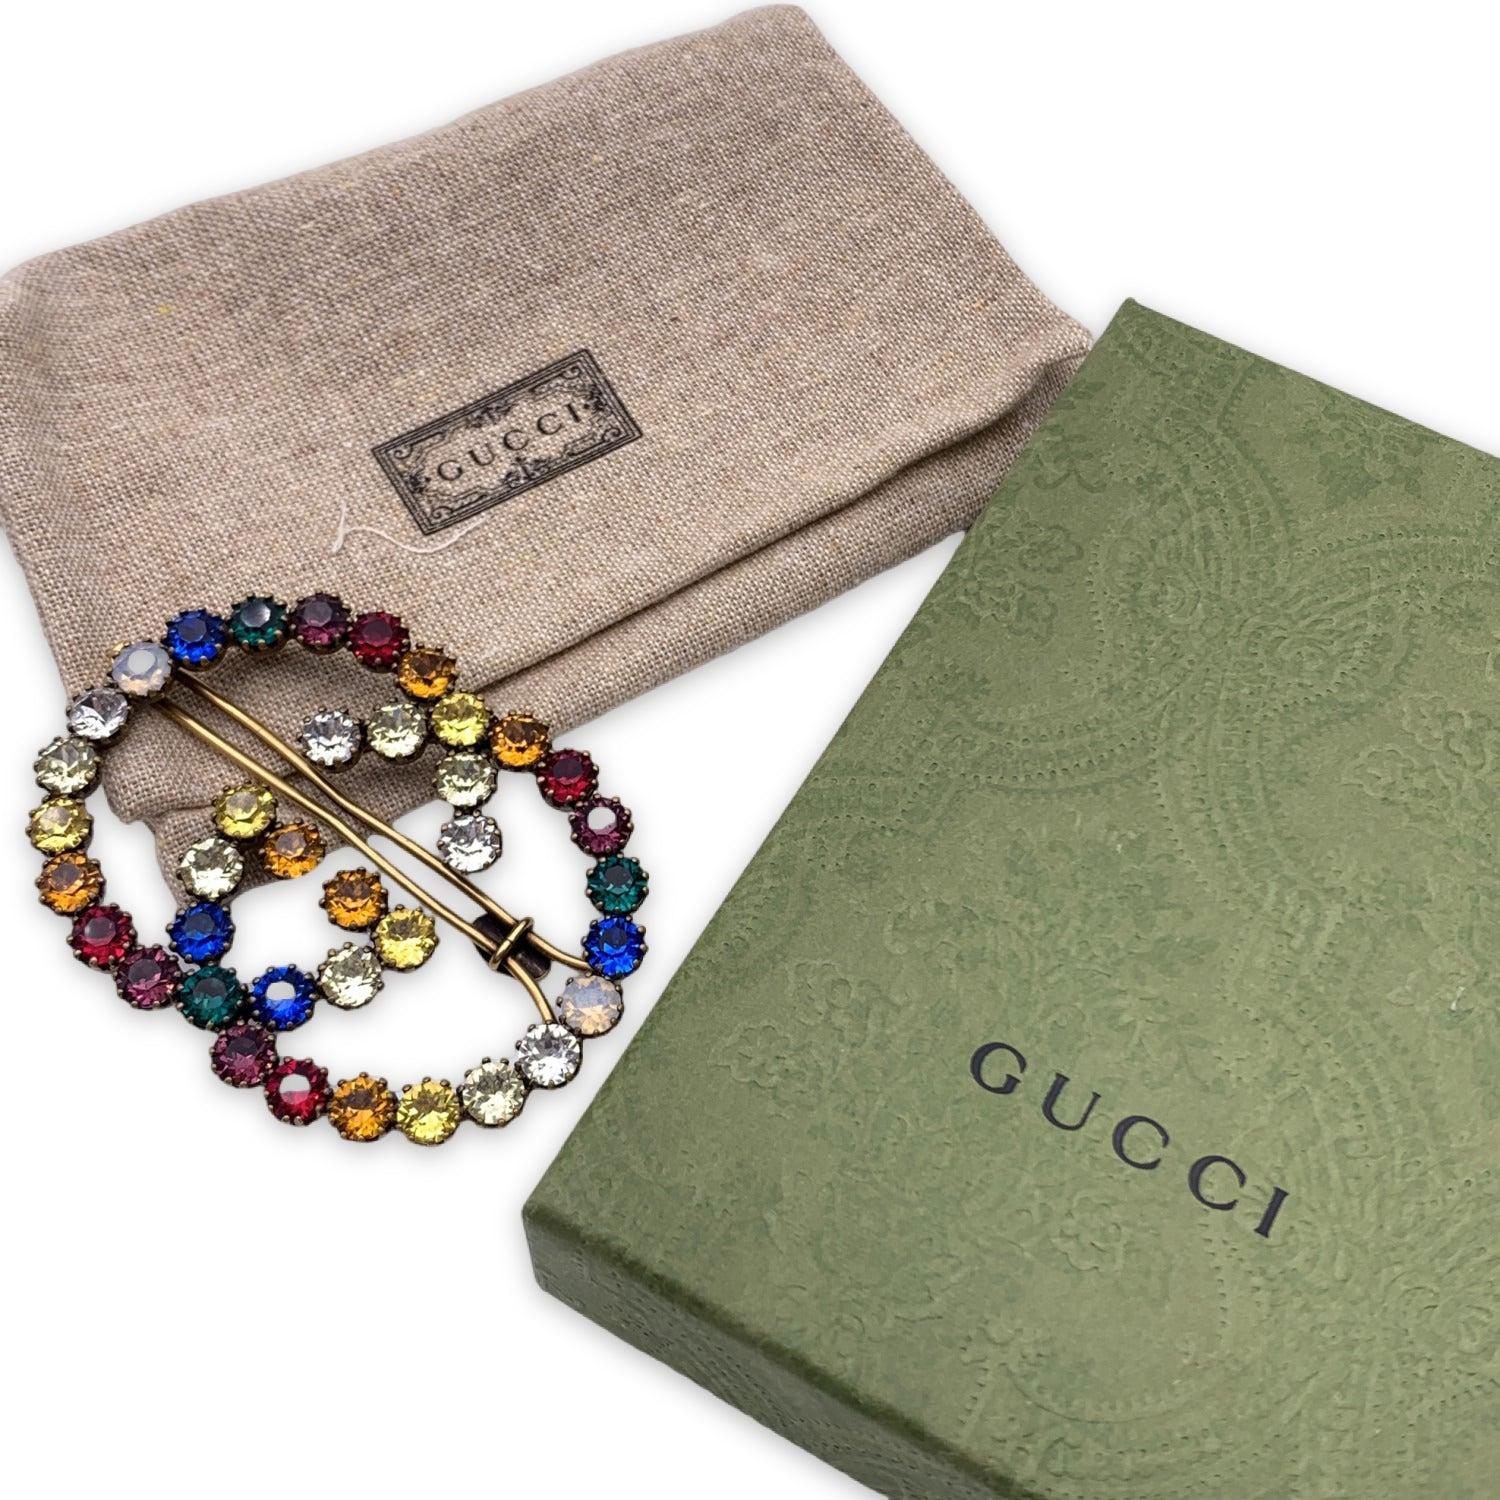 Lovely Gucci Interlocking G Logo hair clip. Gold metal hair clip with multicolored crystals. Width: 2.75 inches - 7 cm. Height: 2 inches - 5.1. cm. Retail price is 450 Euros Details MATERIAL: Metal COLOR: Multicolour MODEL: - GENDER: Women COUNTRY